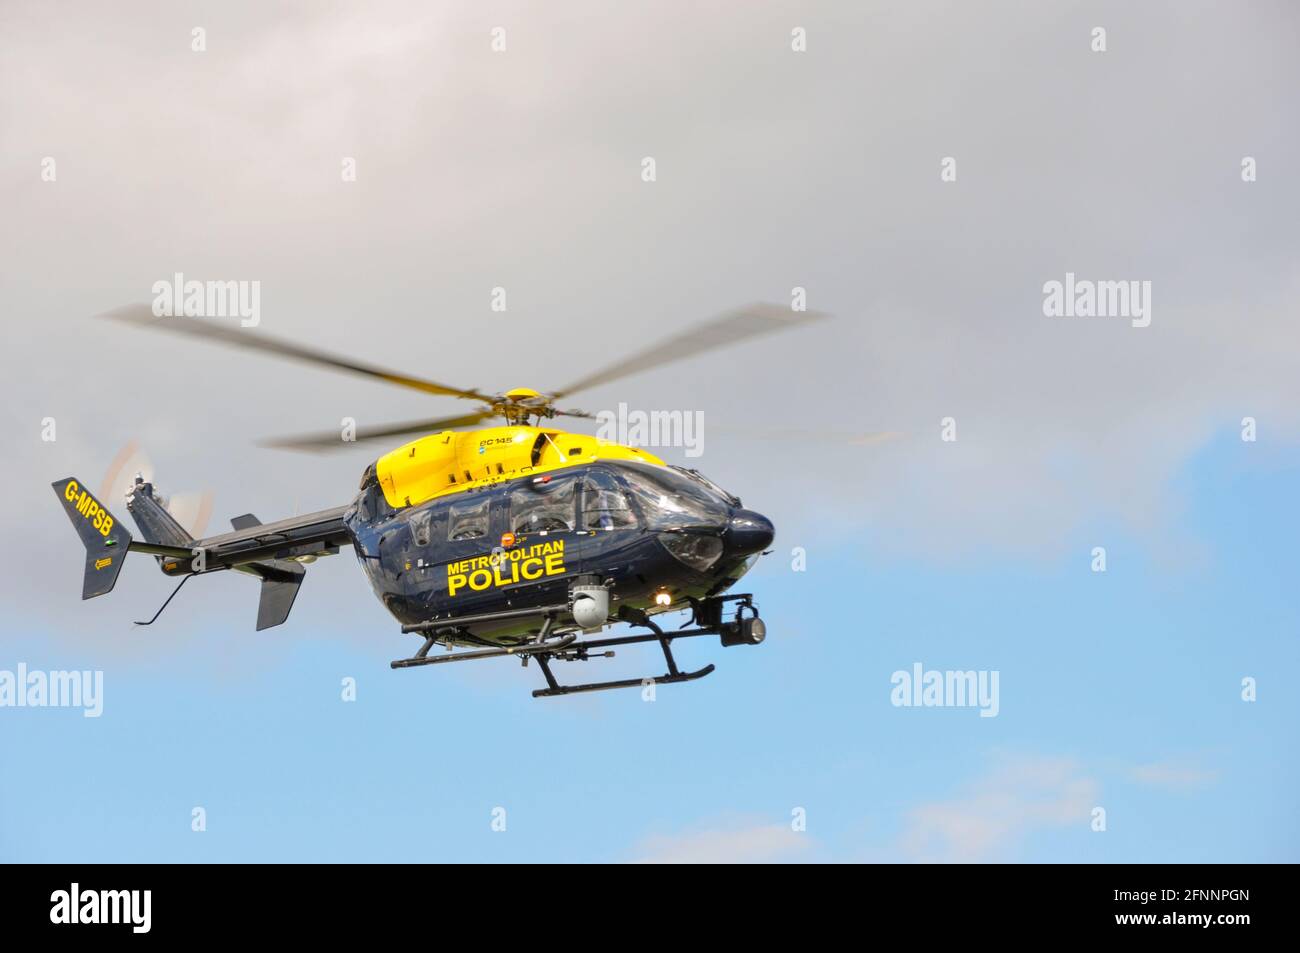 Metropolitan Police helicopter Eurocopter EC145 G-MPSB at North Weald, Essex, UK. Flying in broken cloud. Bright, sunny day. Stock Photo